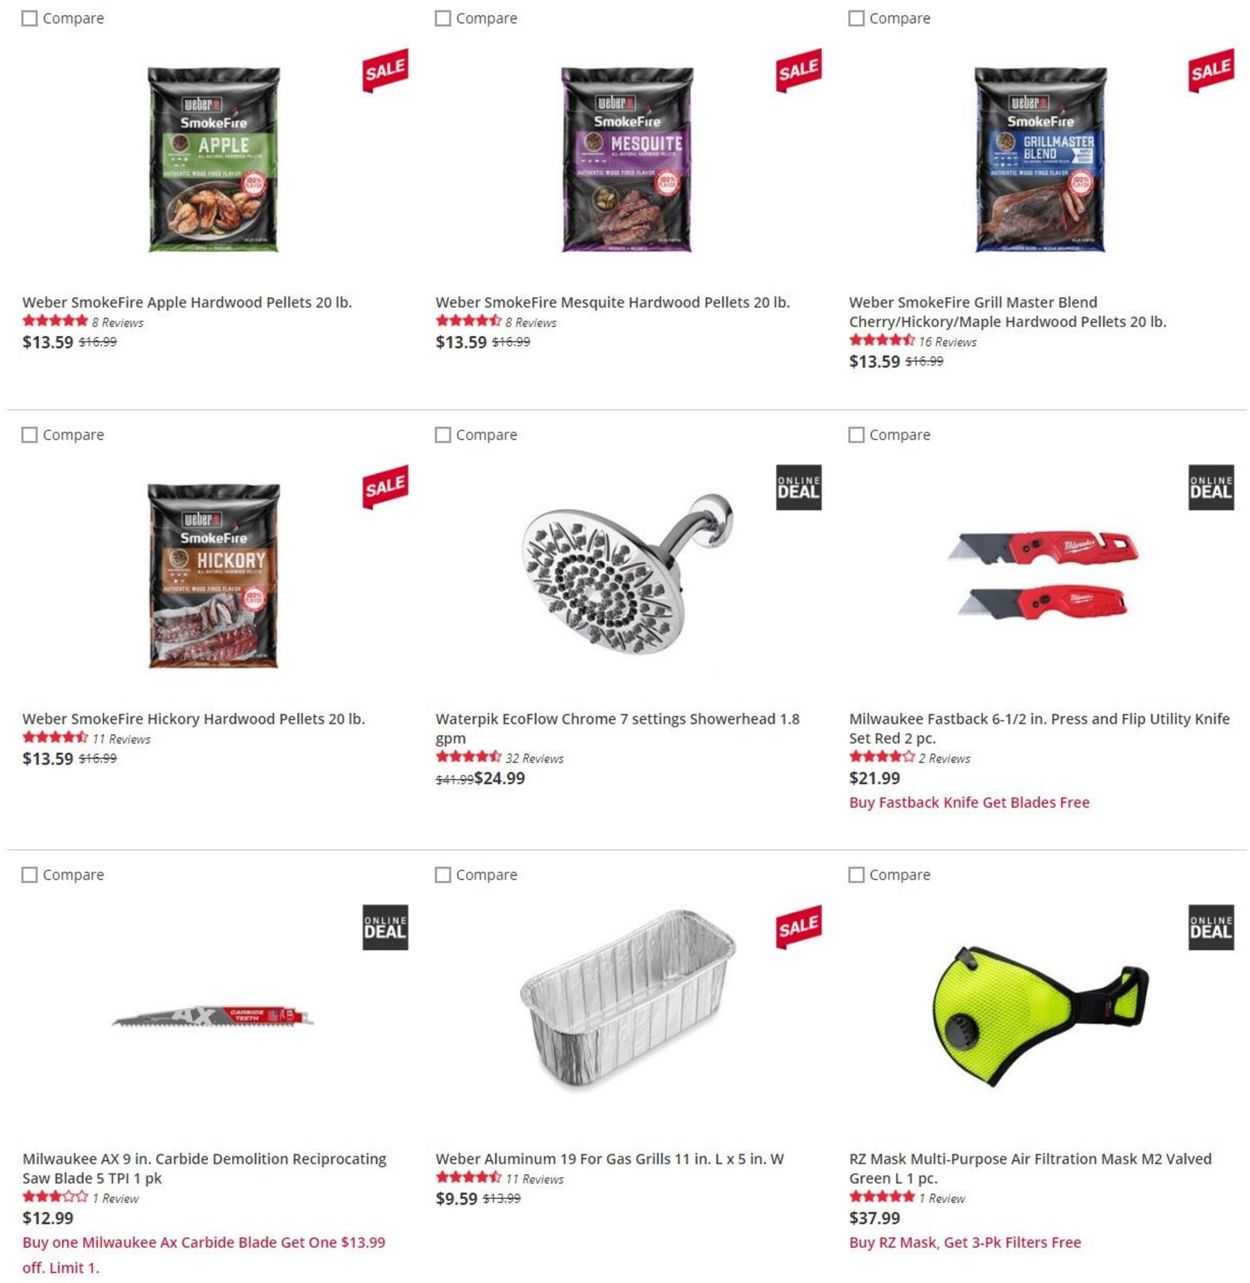 Ace Hardware Current weekly ad 12/31 01/06/2021 [8